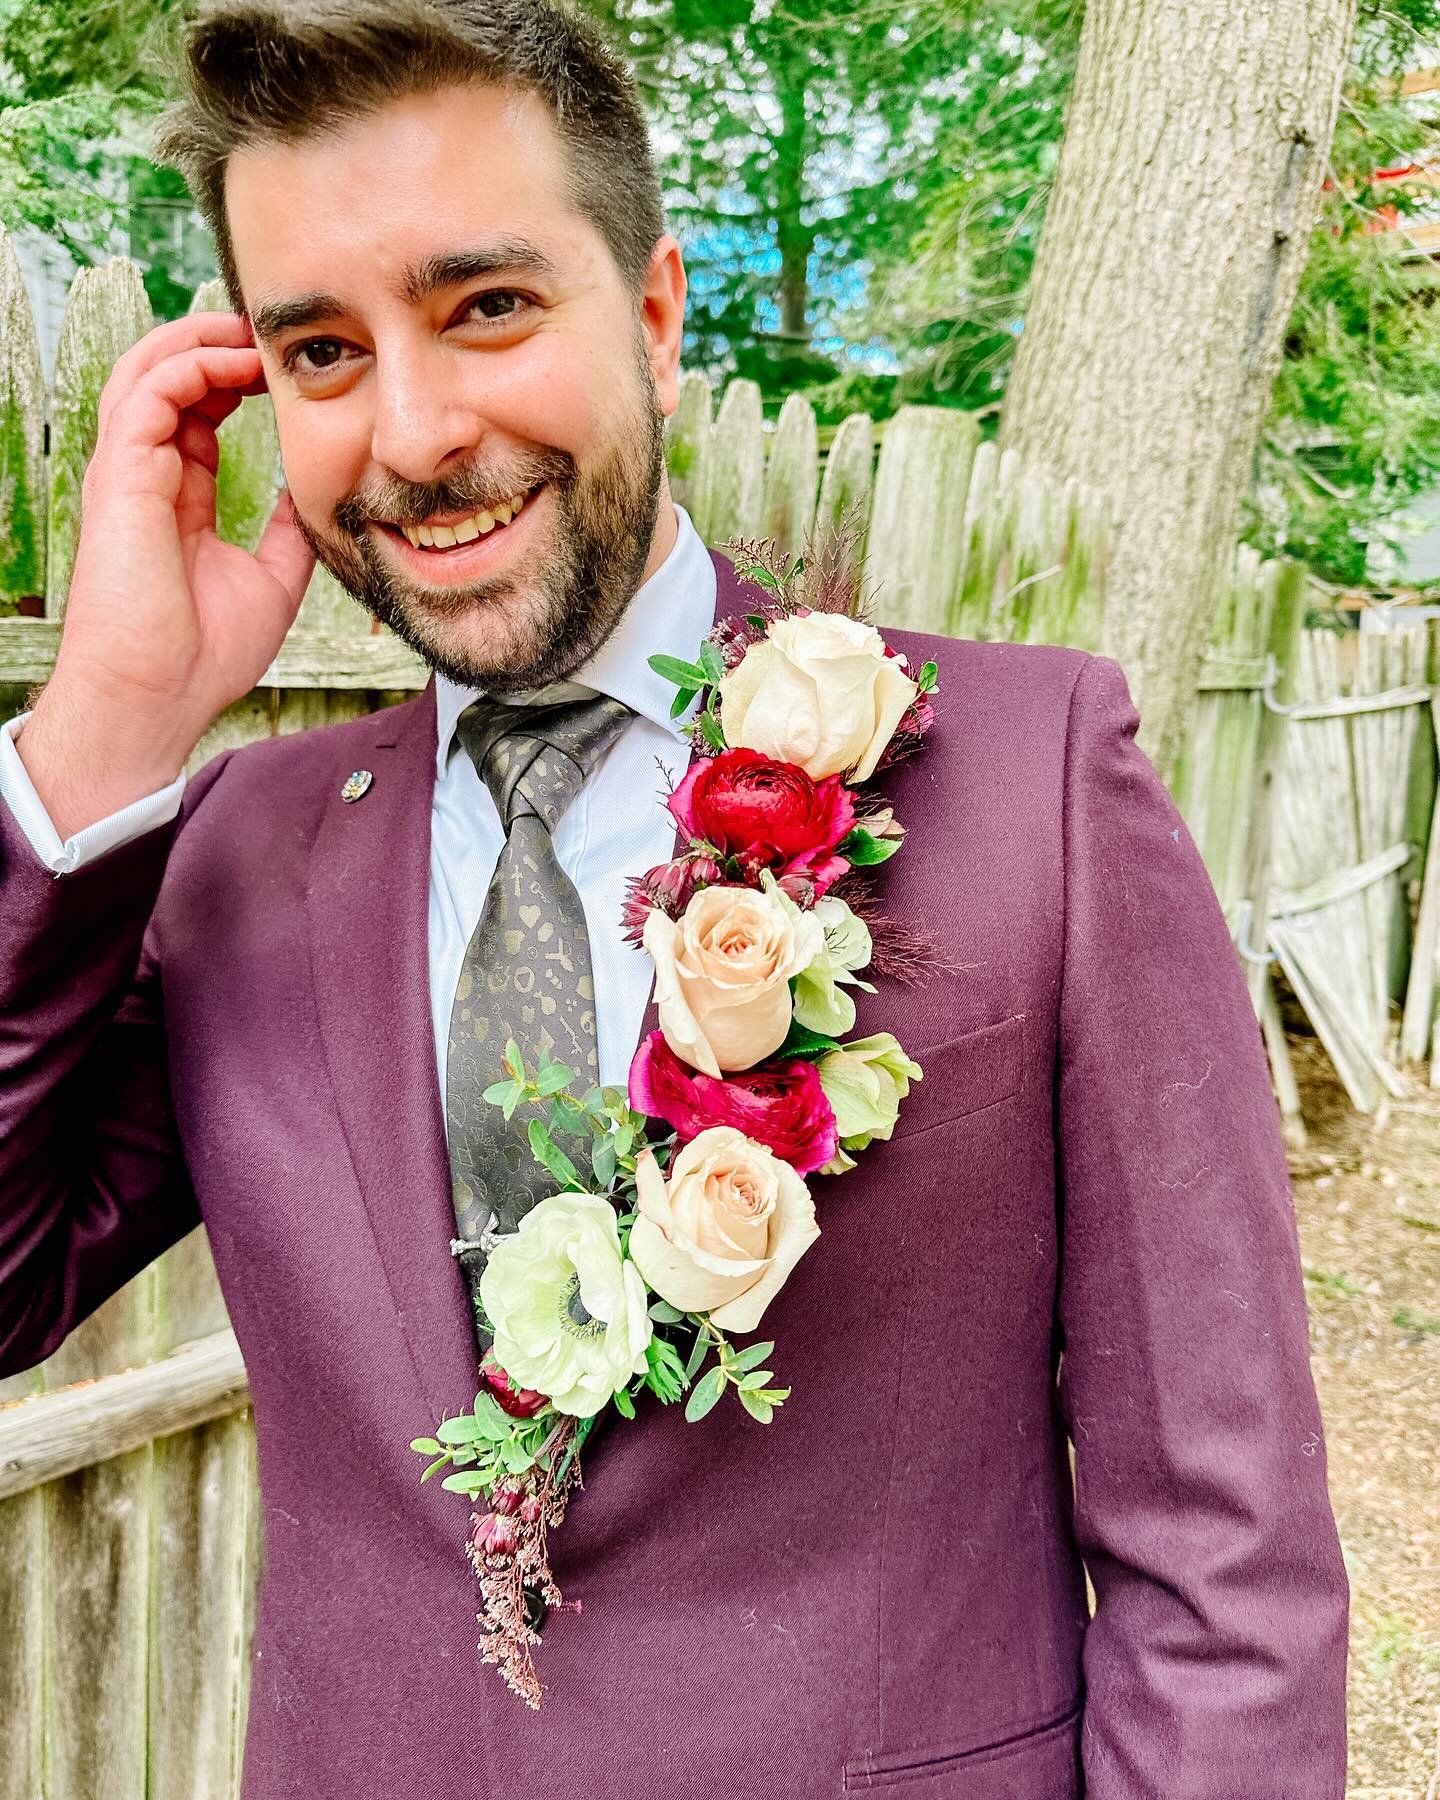 Groom in bloom 🌸

@thouartodd and @burkus21&rsquo;s wedding this past weekend was nothing short of spectacular, and the love surrounding the whole night was physically palpable. Honored that I got to be a part of the celebration in this way.❤️🥲

St